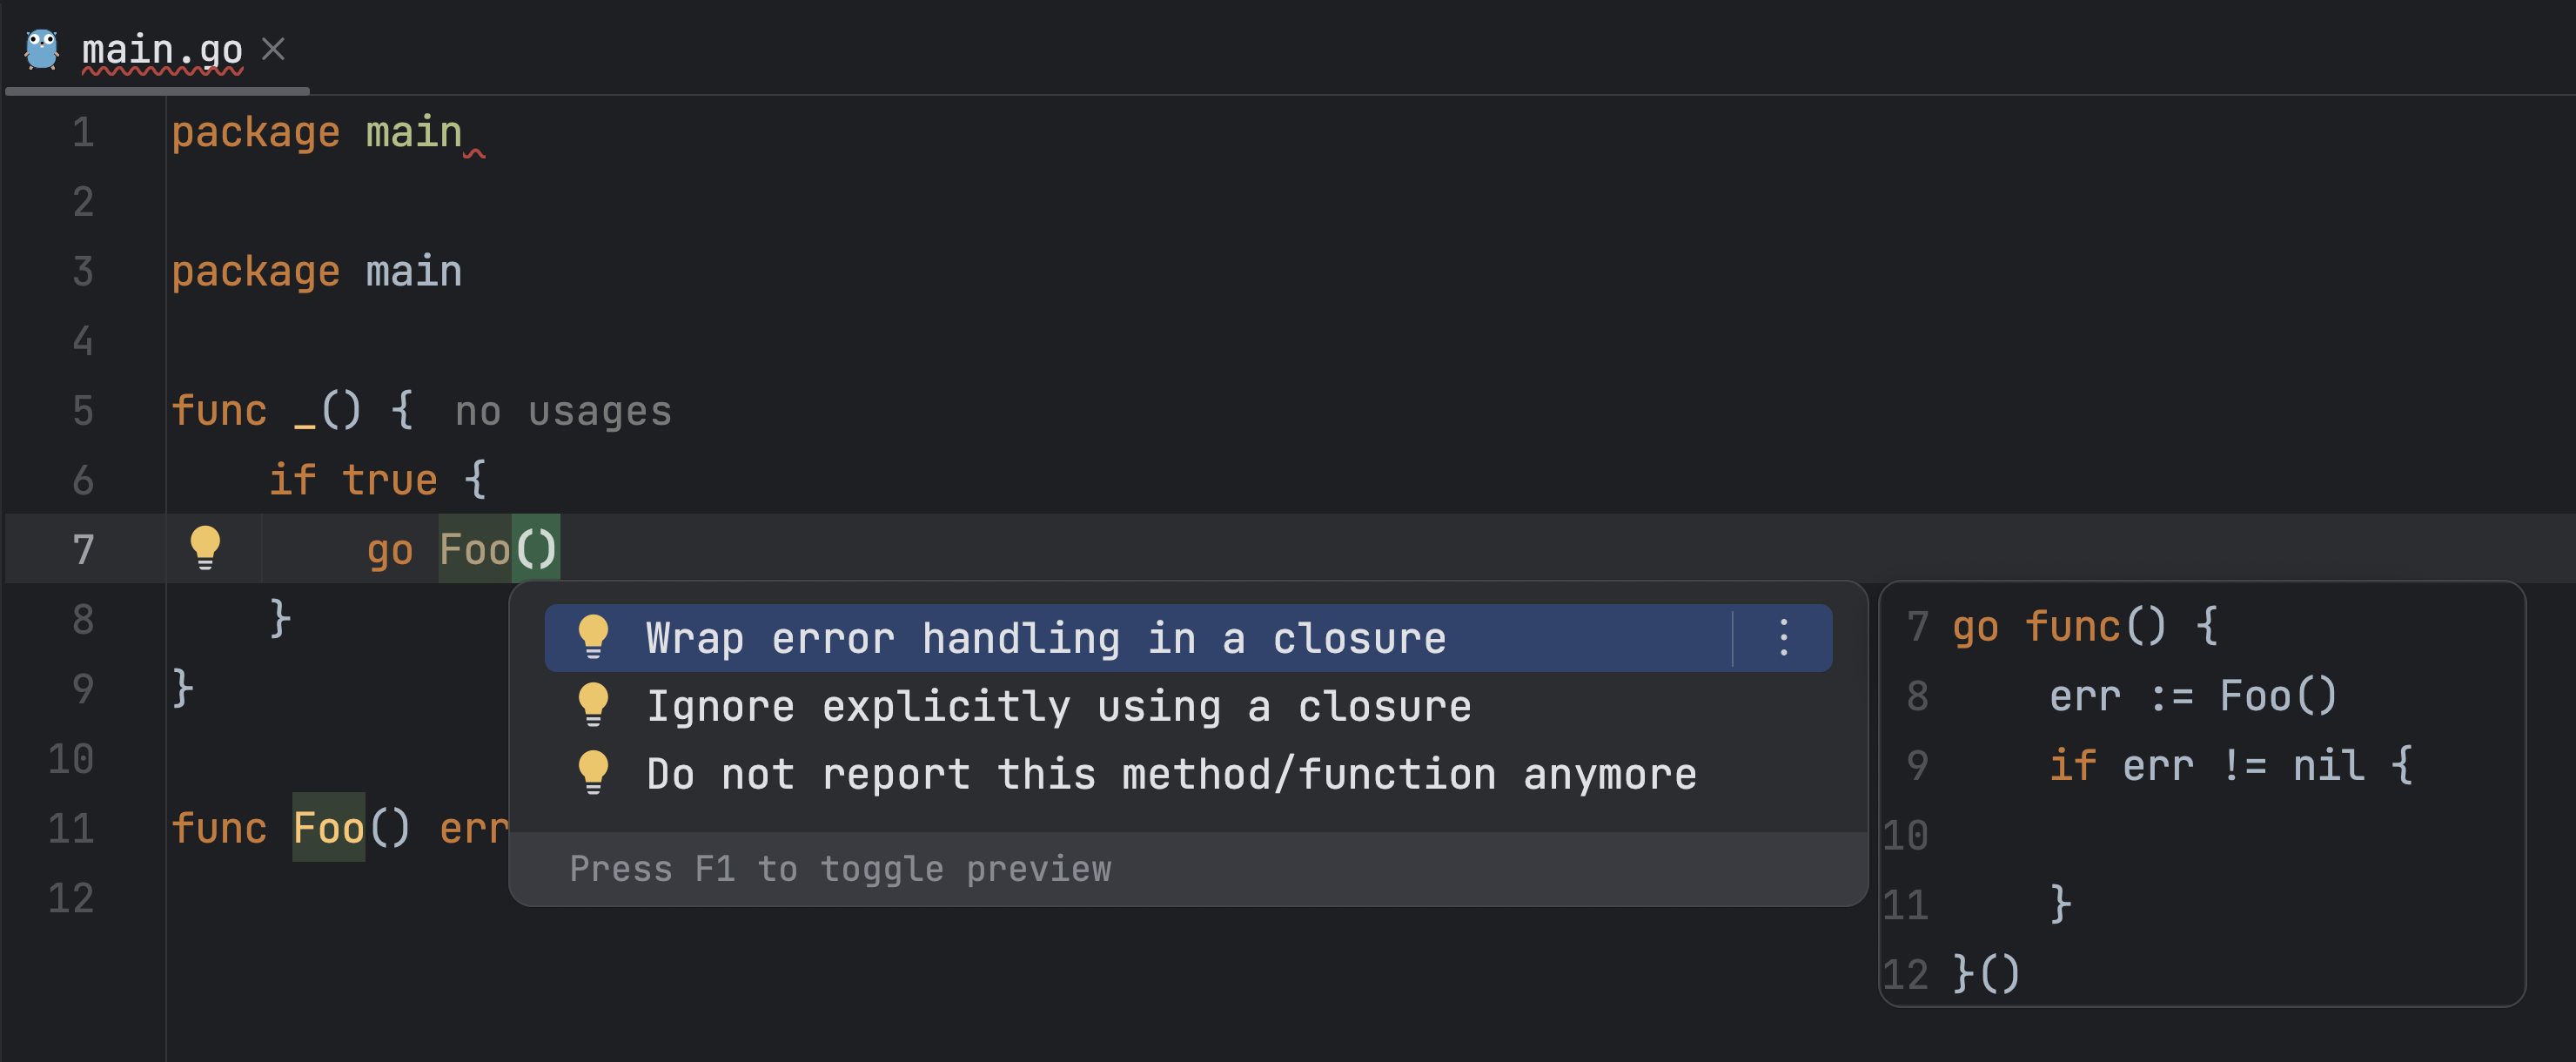 The preview for the Wrap error handling in a closure intention action in GoLand